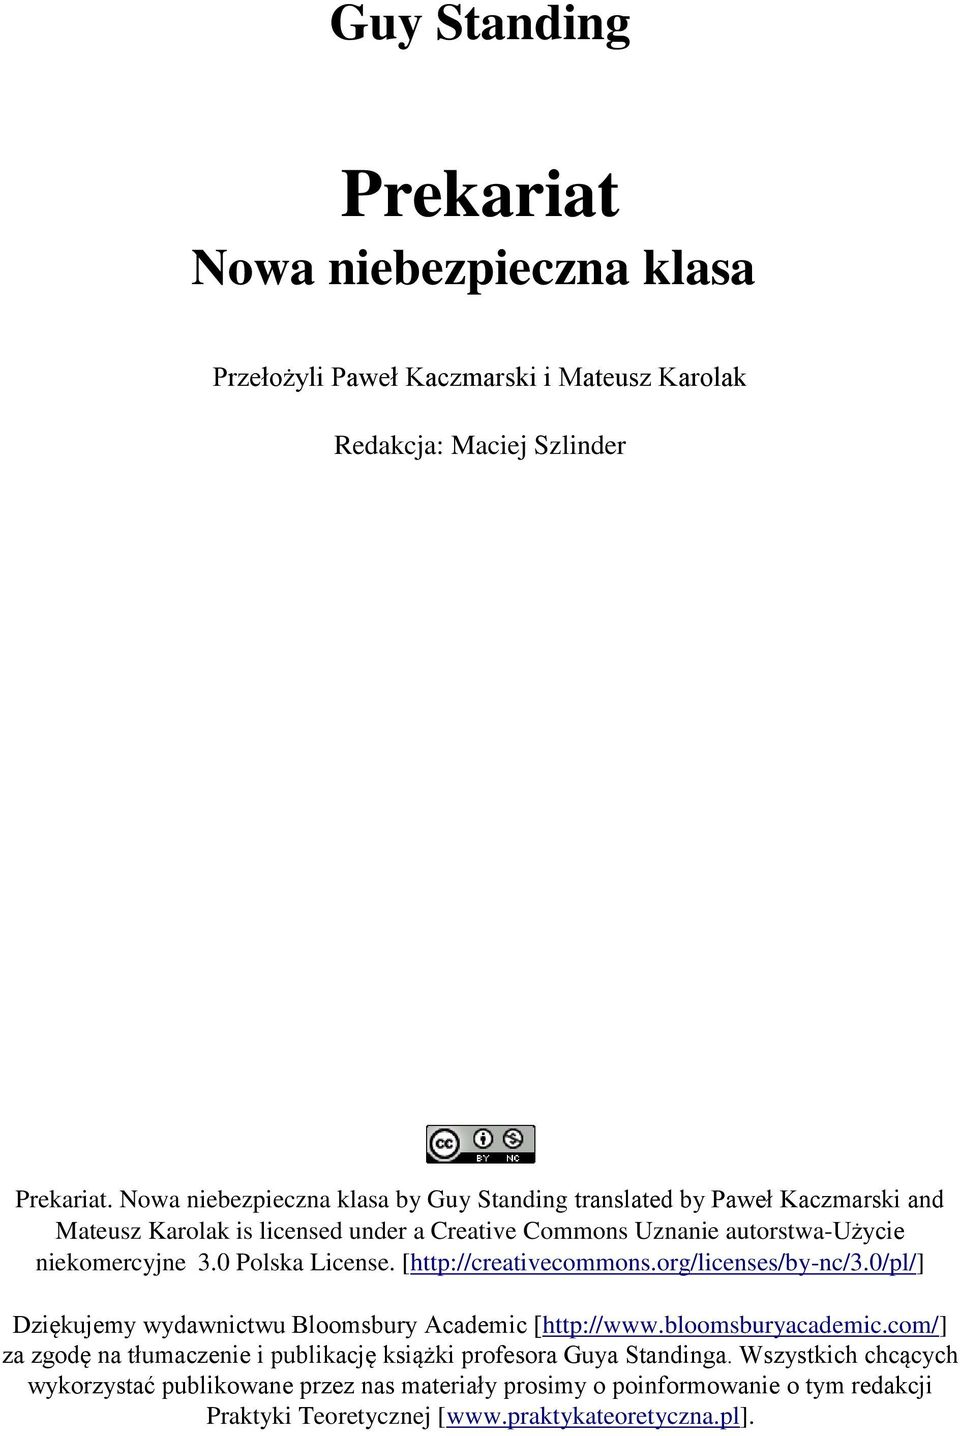 0 Polska License. [http://creativecommons.org/licenses/by-nc/3.0/pl/] Dziękujemy wydawnictwu Bloomsbury Academic [http://www.bloomsburyacademic.